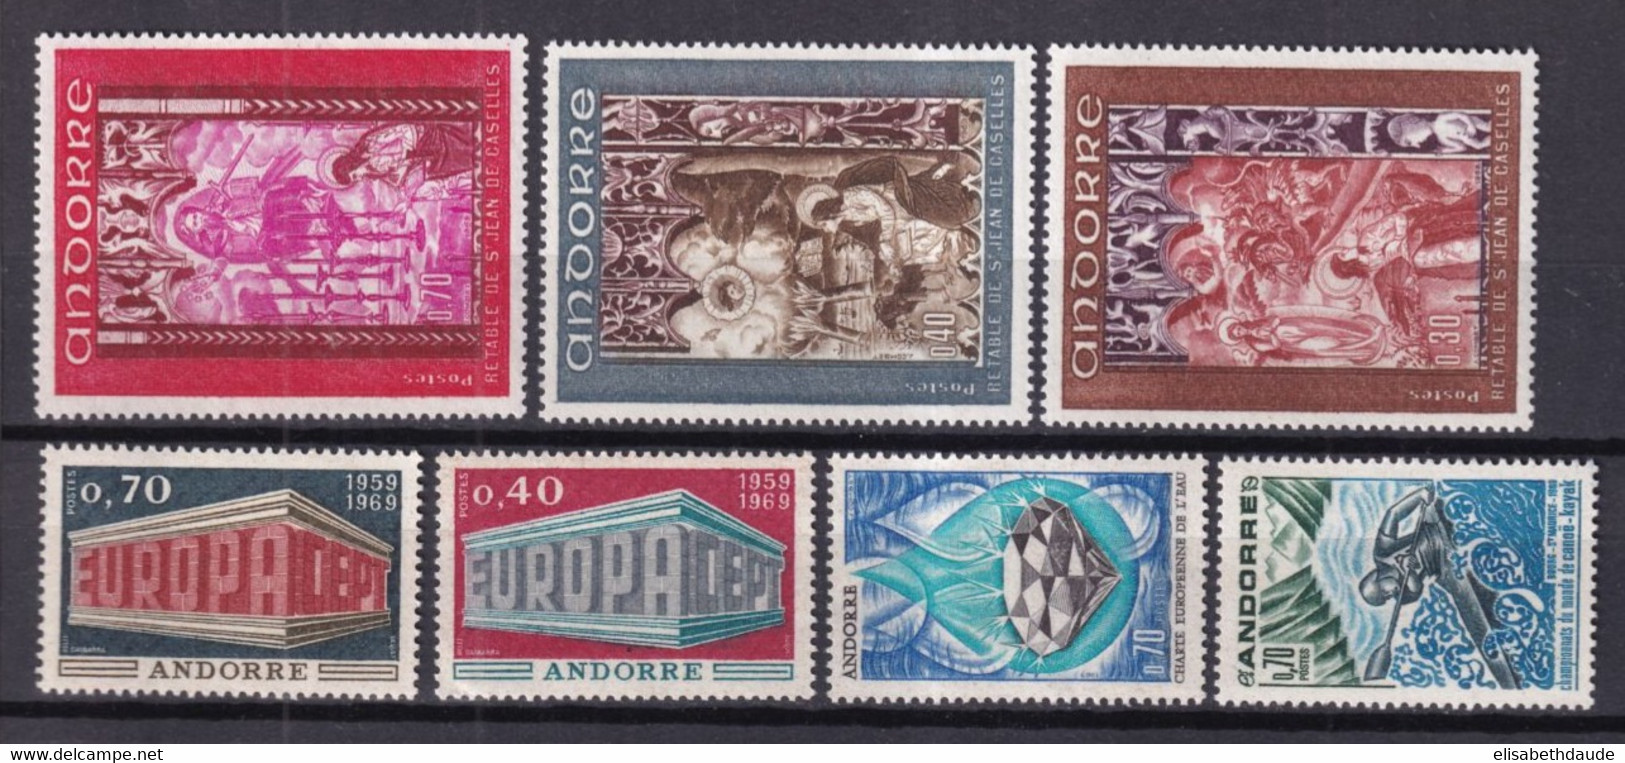 ANDORRE - ANNEE COMPLETE 1969 YVERT N°194/200 ** MNH - COTE 2017 = 54.4 EUR. - - Annate Complete